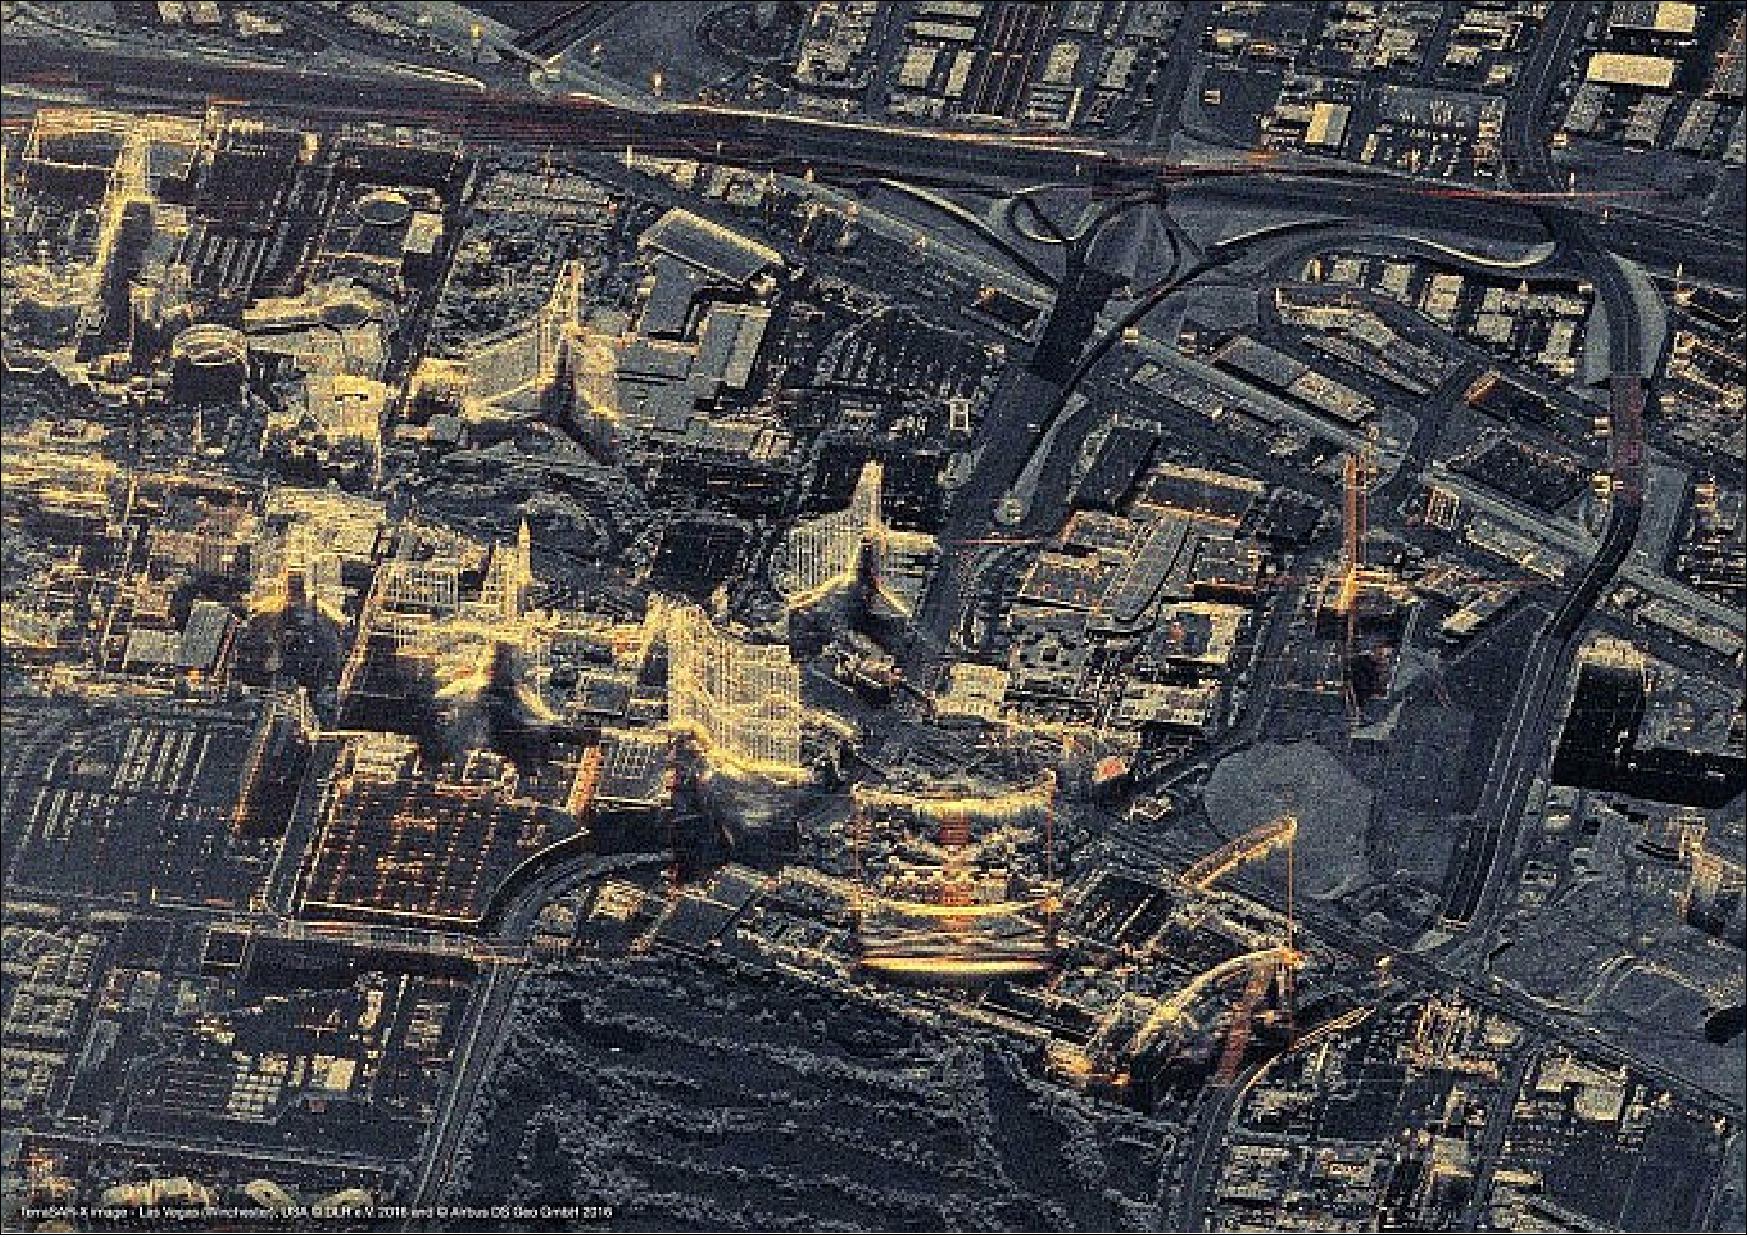 Figure 20: TerraSAR-X image of Las Vegas (Winchester), Nevada, USA (image credit: Airbus DS) 29)